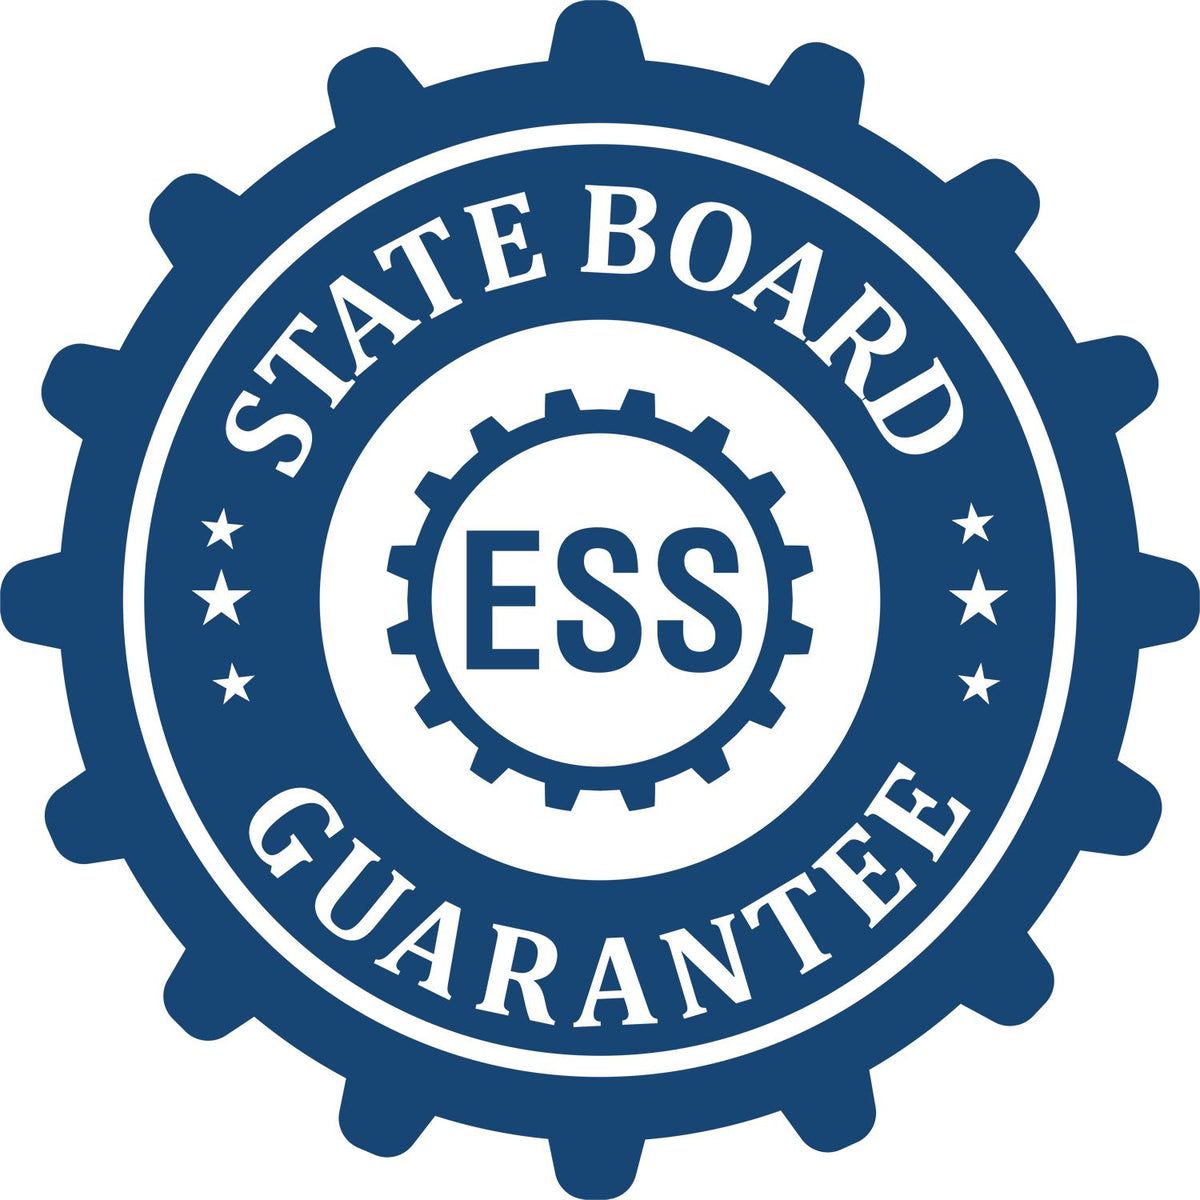 An emblem in a gear shape illustrating a state board guarantee for the State of North Dakota Long Reach Architectural Embossing Seal product.